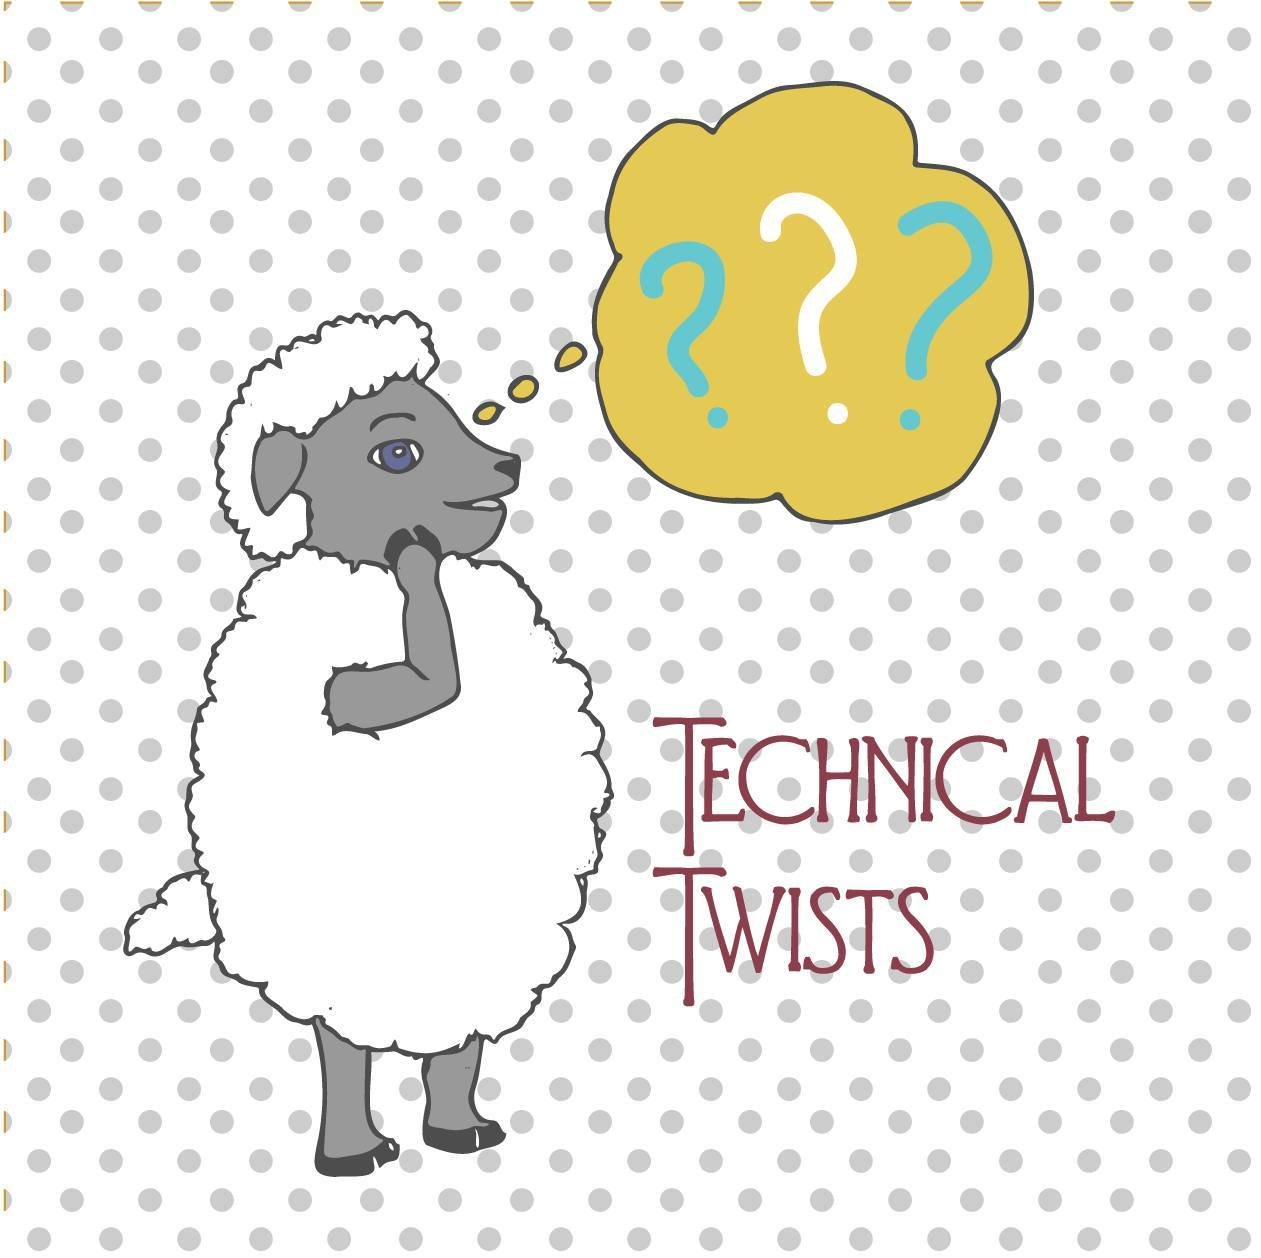 Today on the Blog of Making Stuff, I start a new occasional series, Technical Twists, exploring quirky issues that have popped up in my technical editing and how I solved them.⁣
⁣
Today: the Case of the Goofy Gauge! (Yes, I did read a lot of Nancy Dr